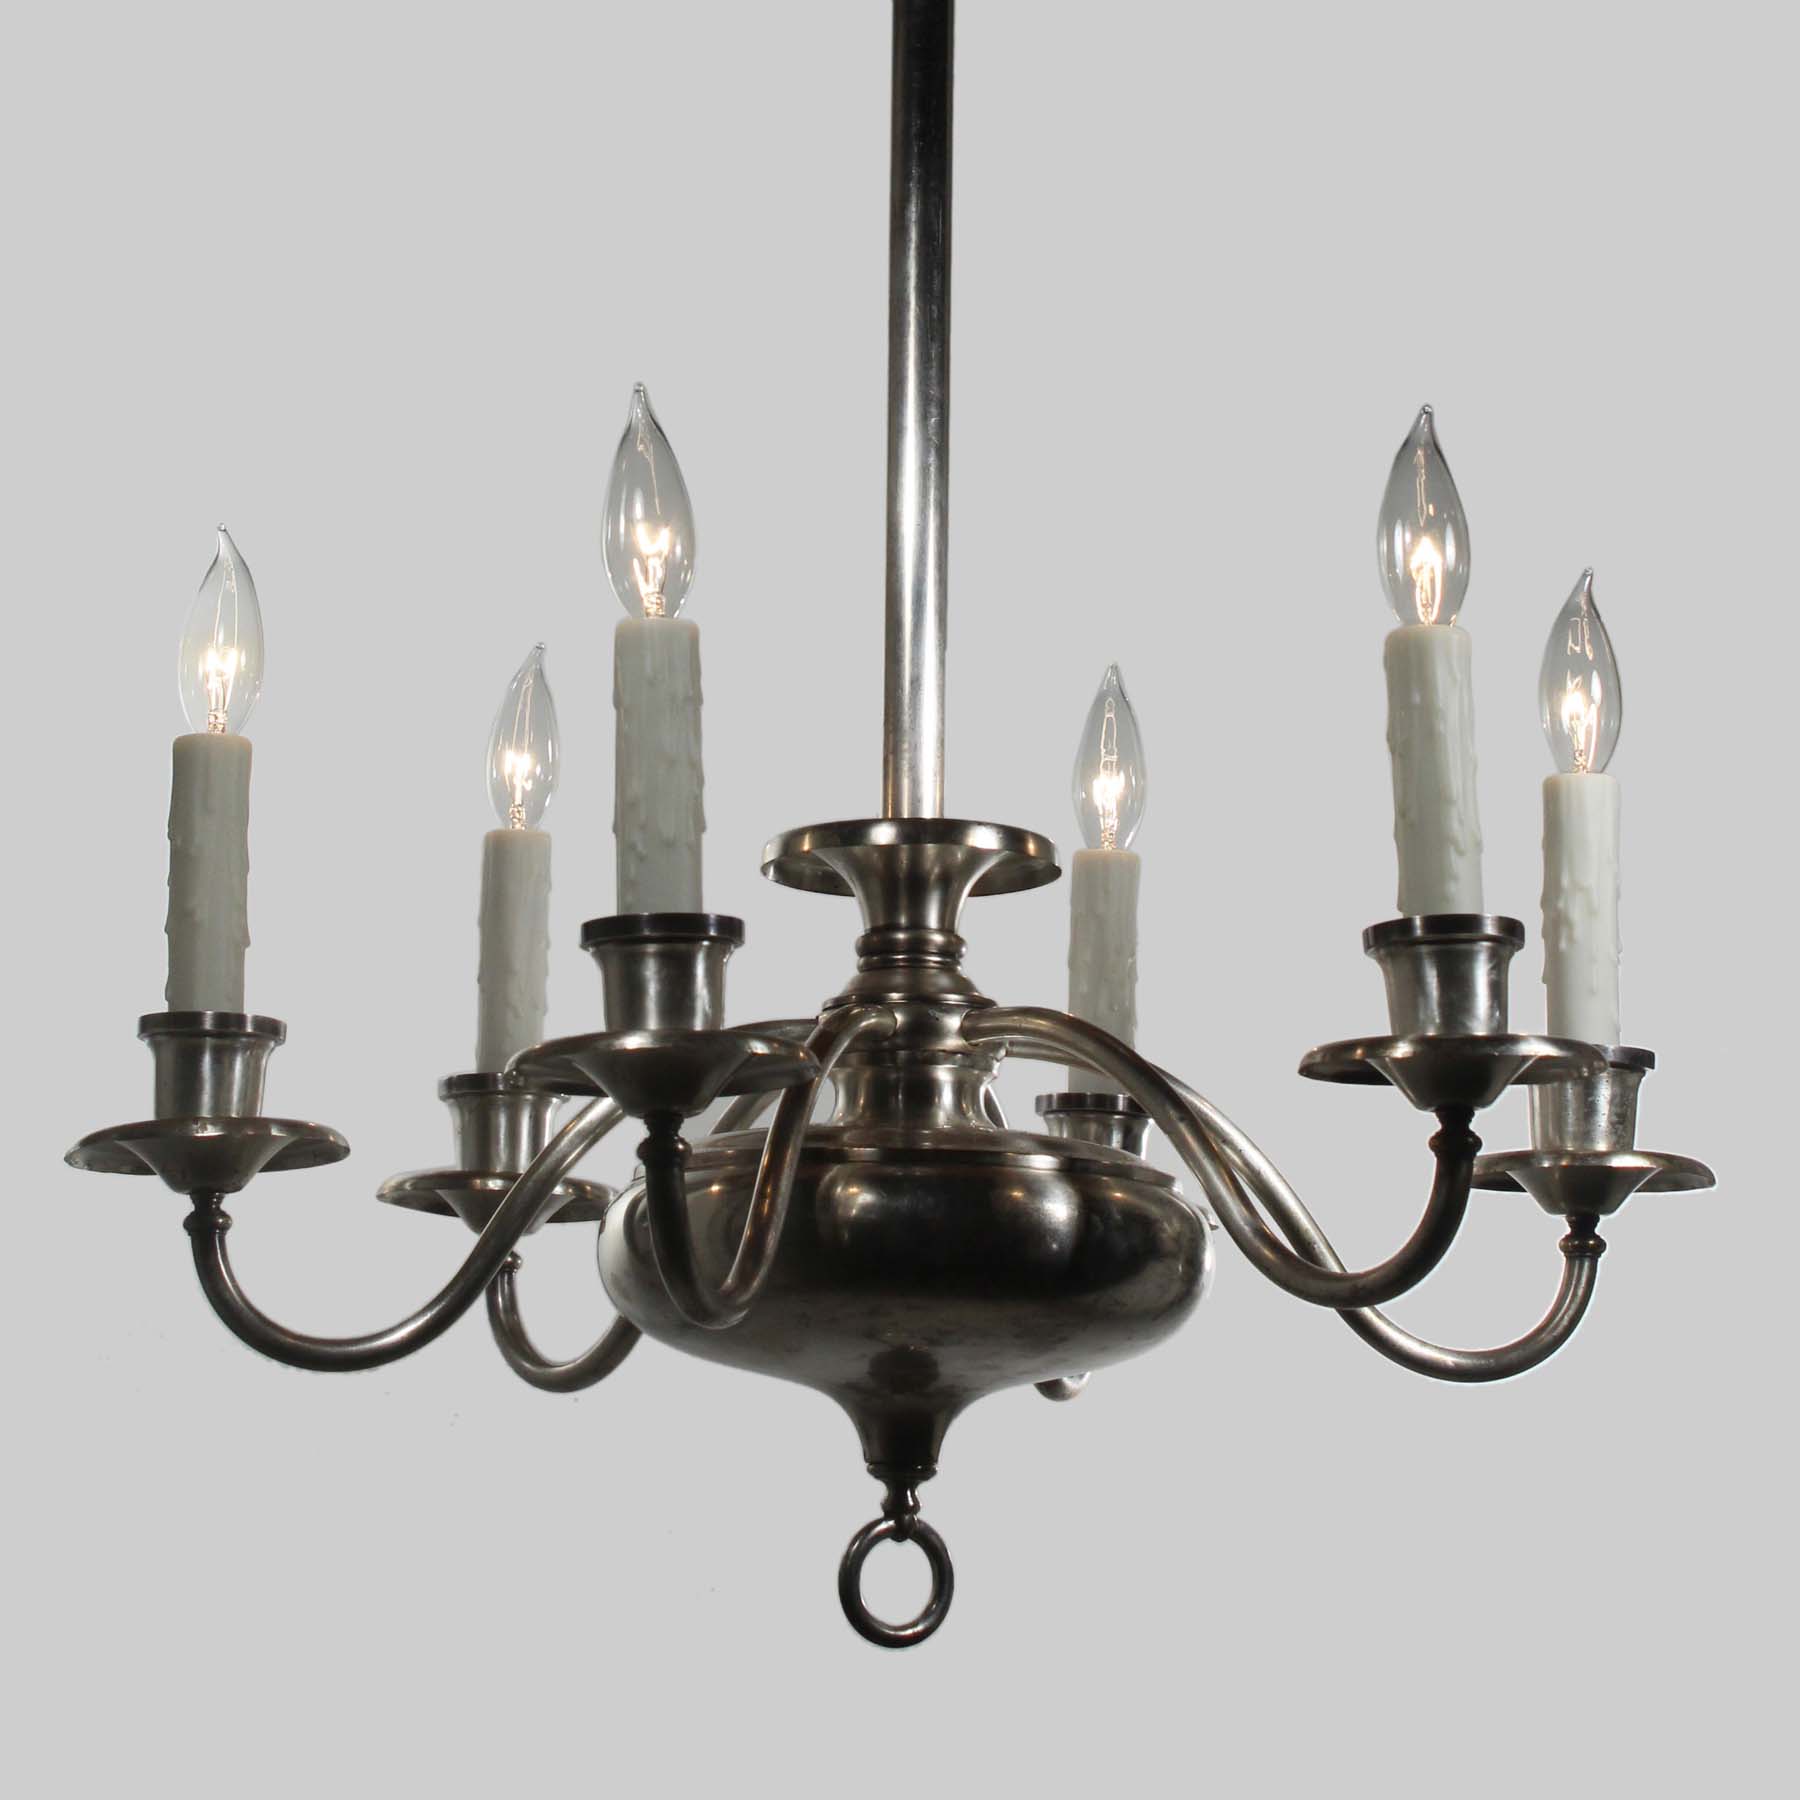 Colonial Revival Silver Plated Chandelier, Antique Lighting-72419